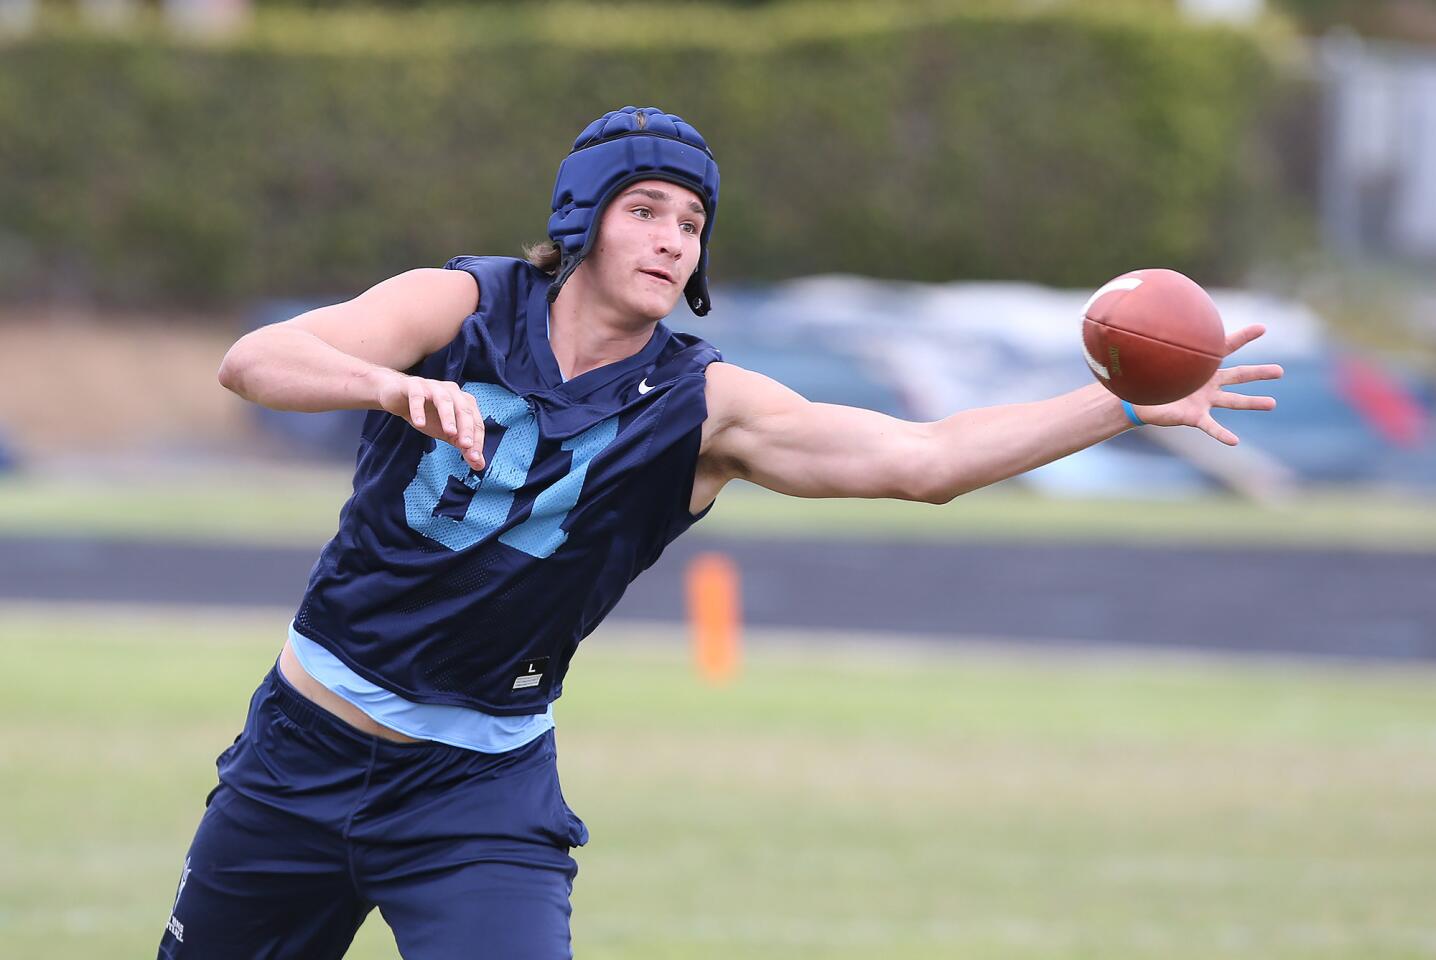 Tight end Mark Redman makes a catch during a spring football showcase at Corona del Mar High on Wednesday.